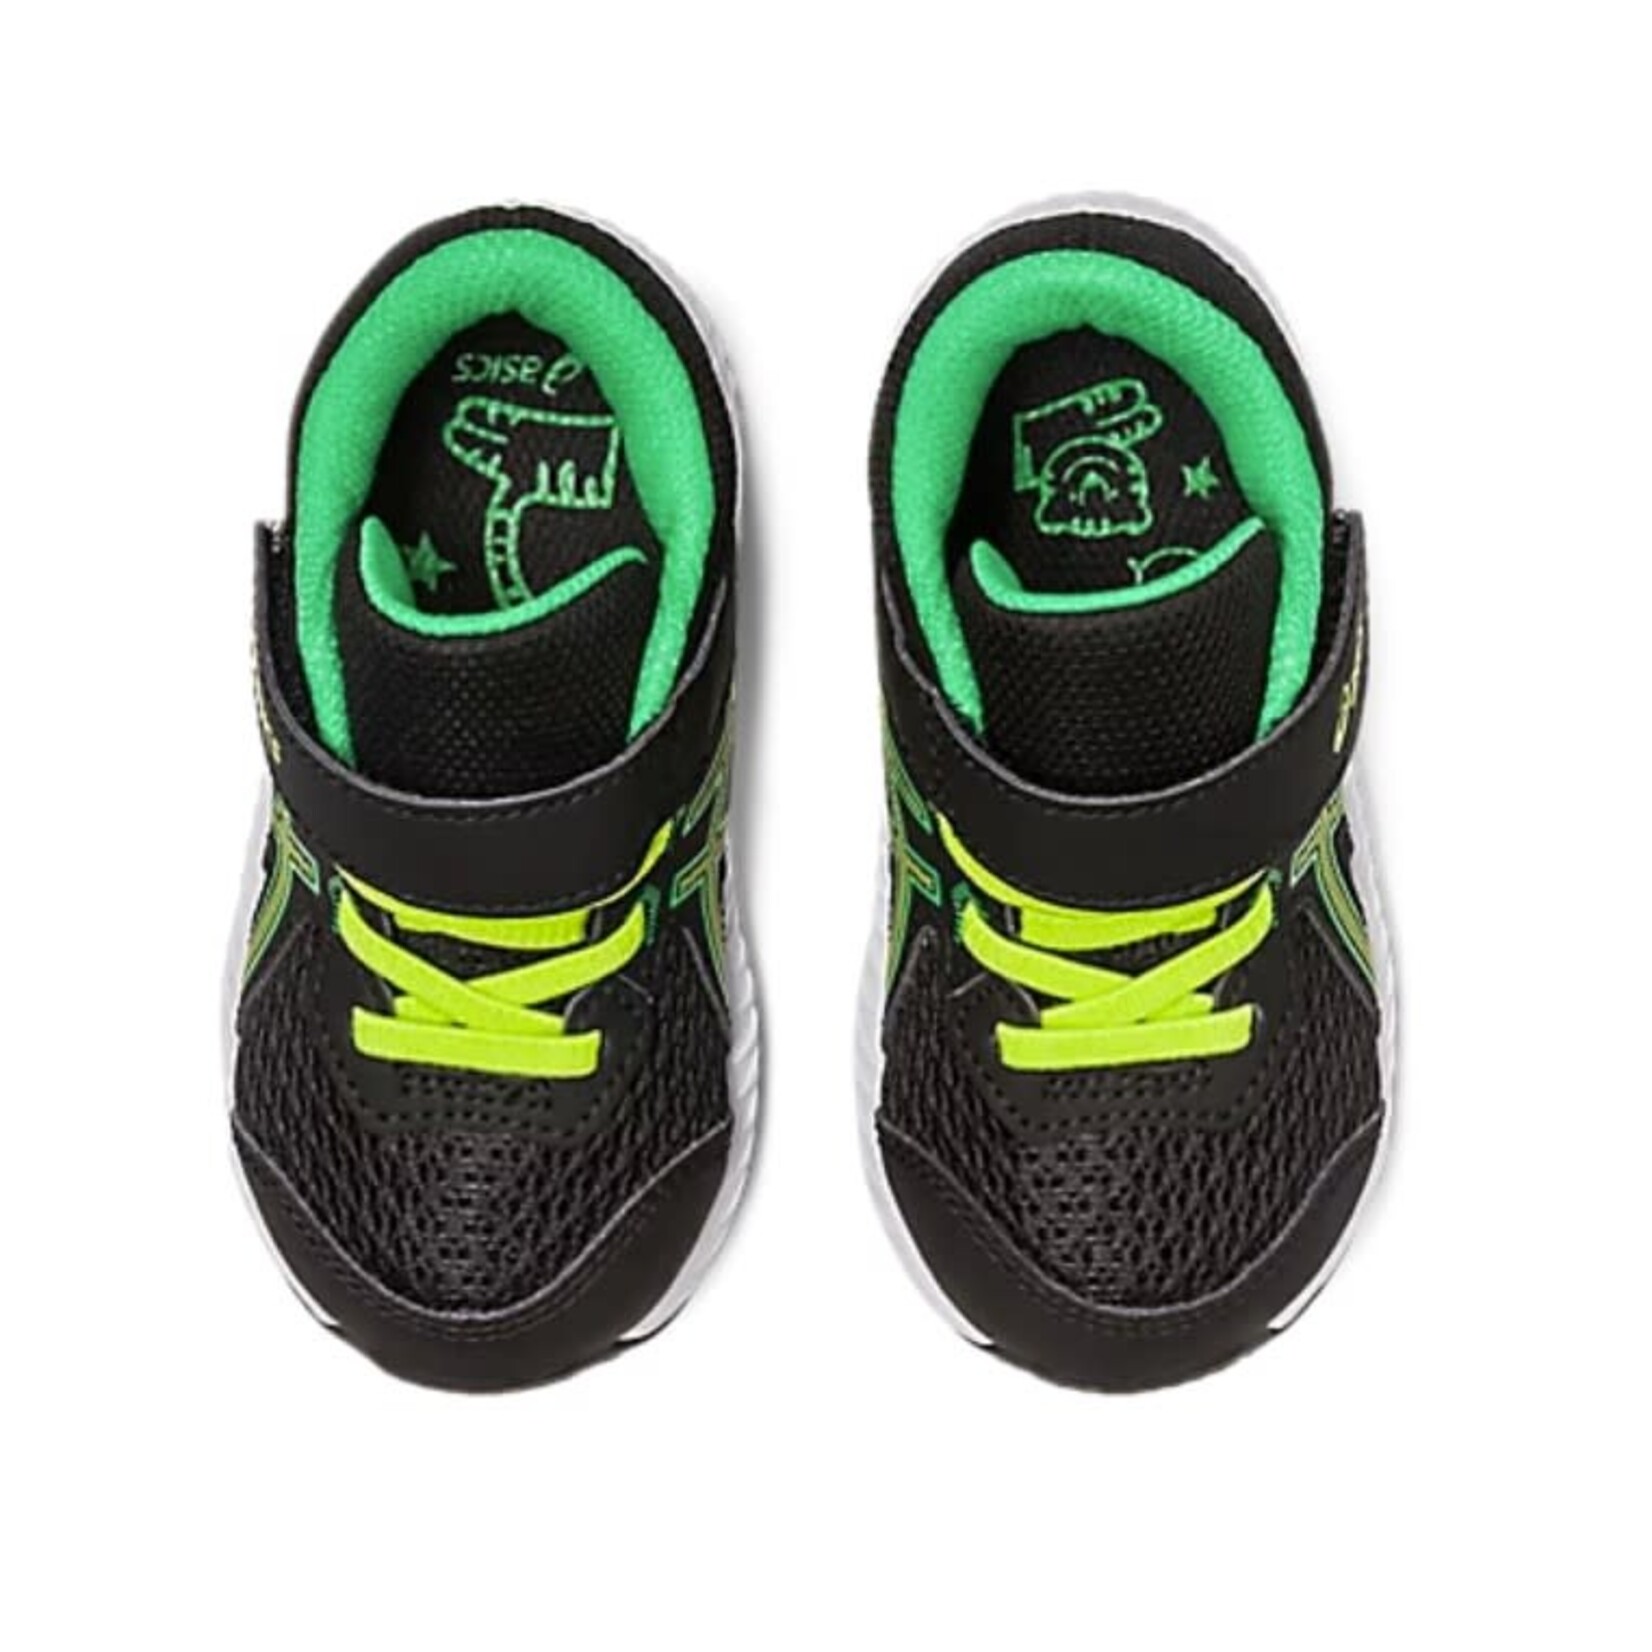 Asics ASICS - Sports shoes 'Contend 8 TS - 'Black Lime Zest' - Toddler